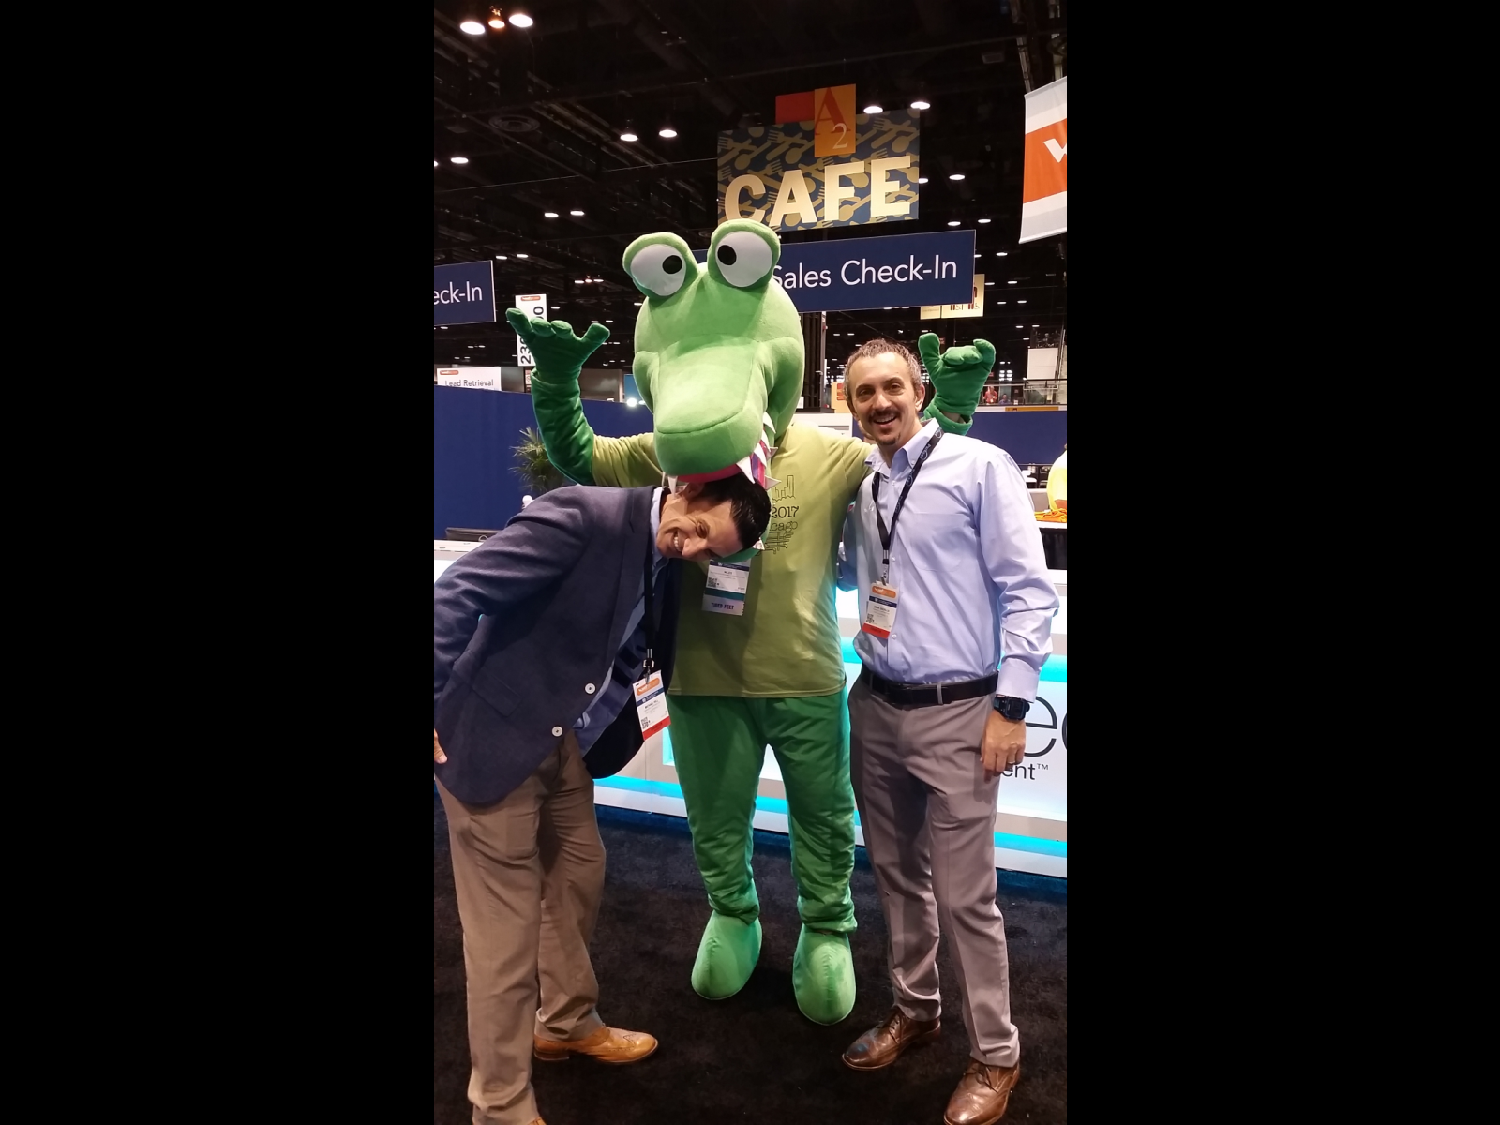 Michael Hill, President/CEO,  having some fun at a conference by showing he is not afraid of a bite from a gator. ; )